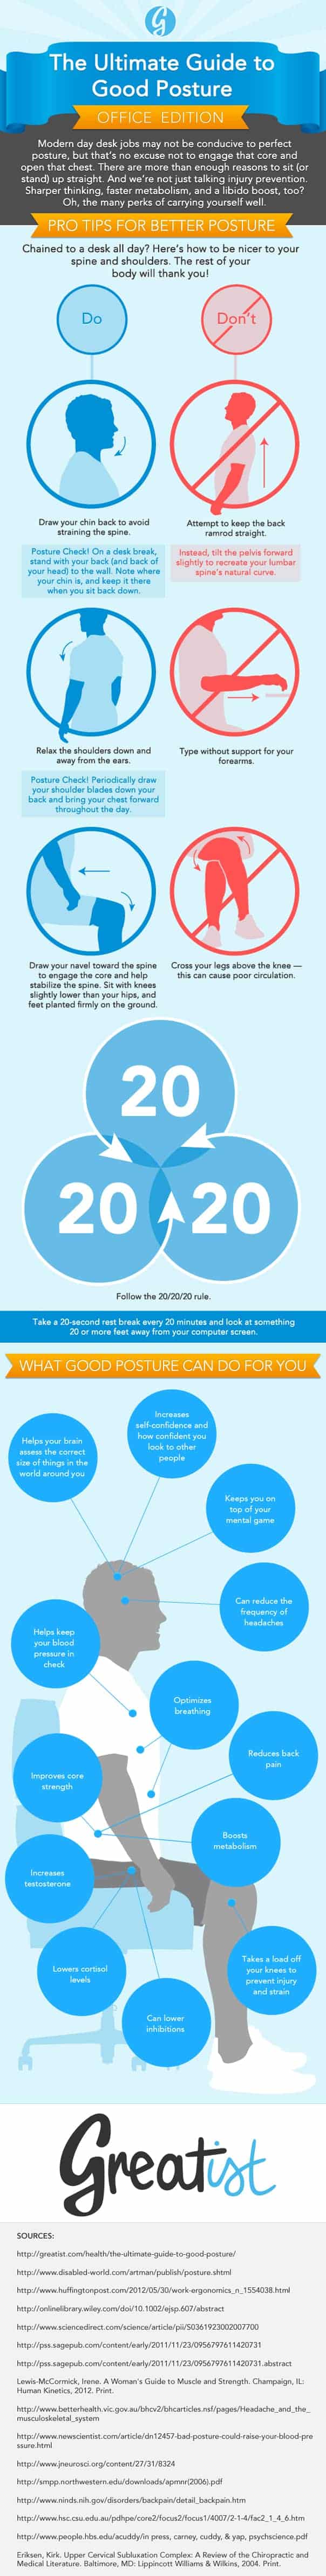 Posture at Work Infographic